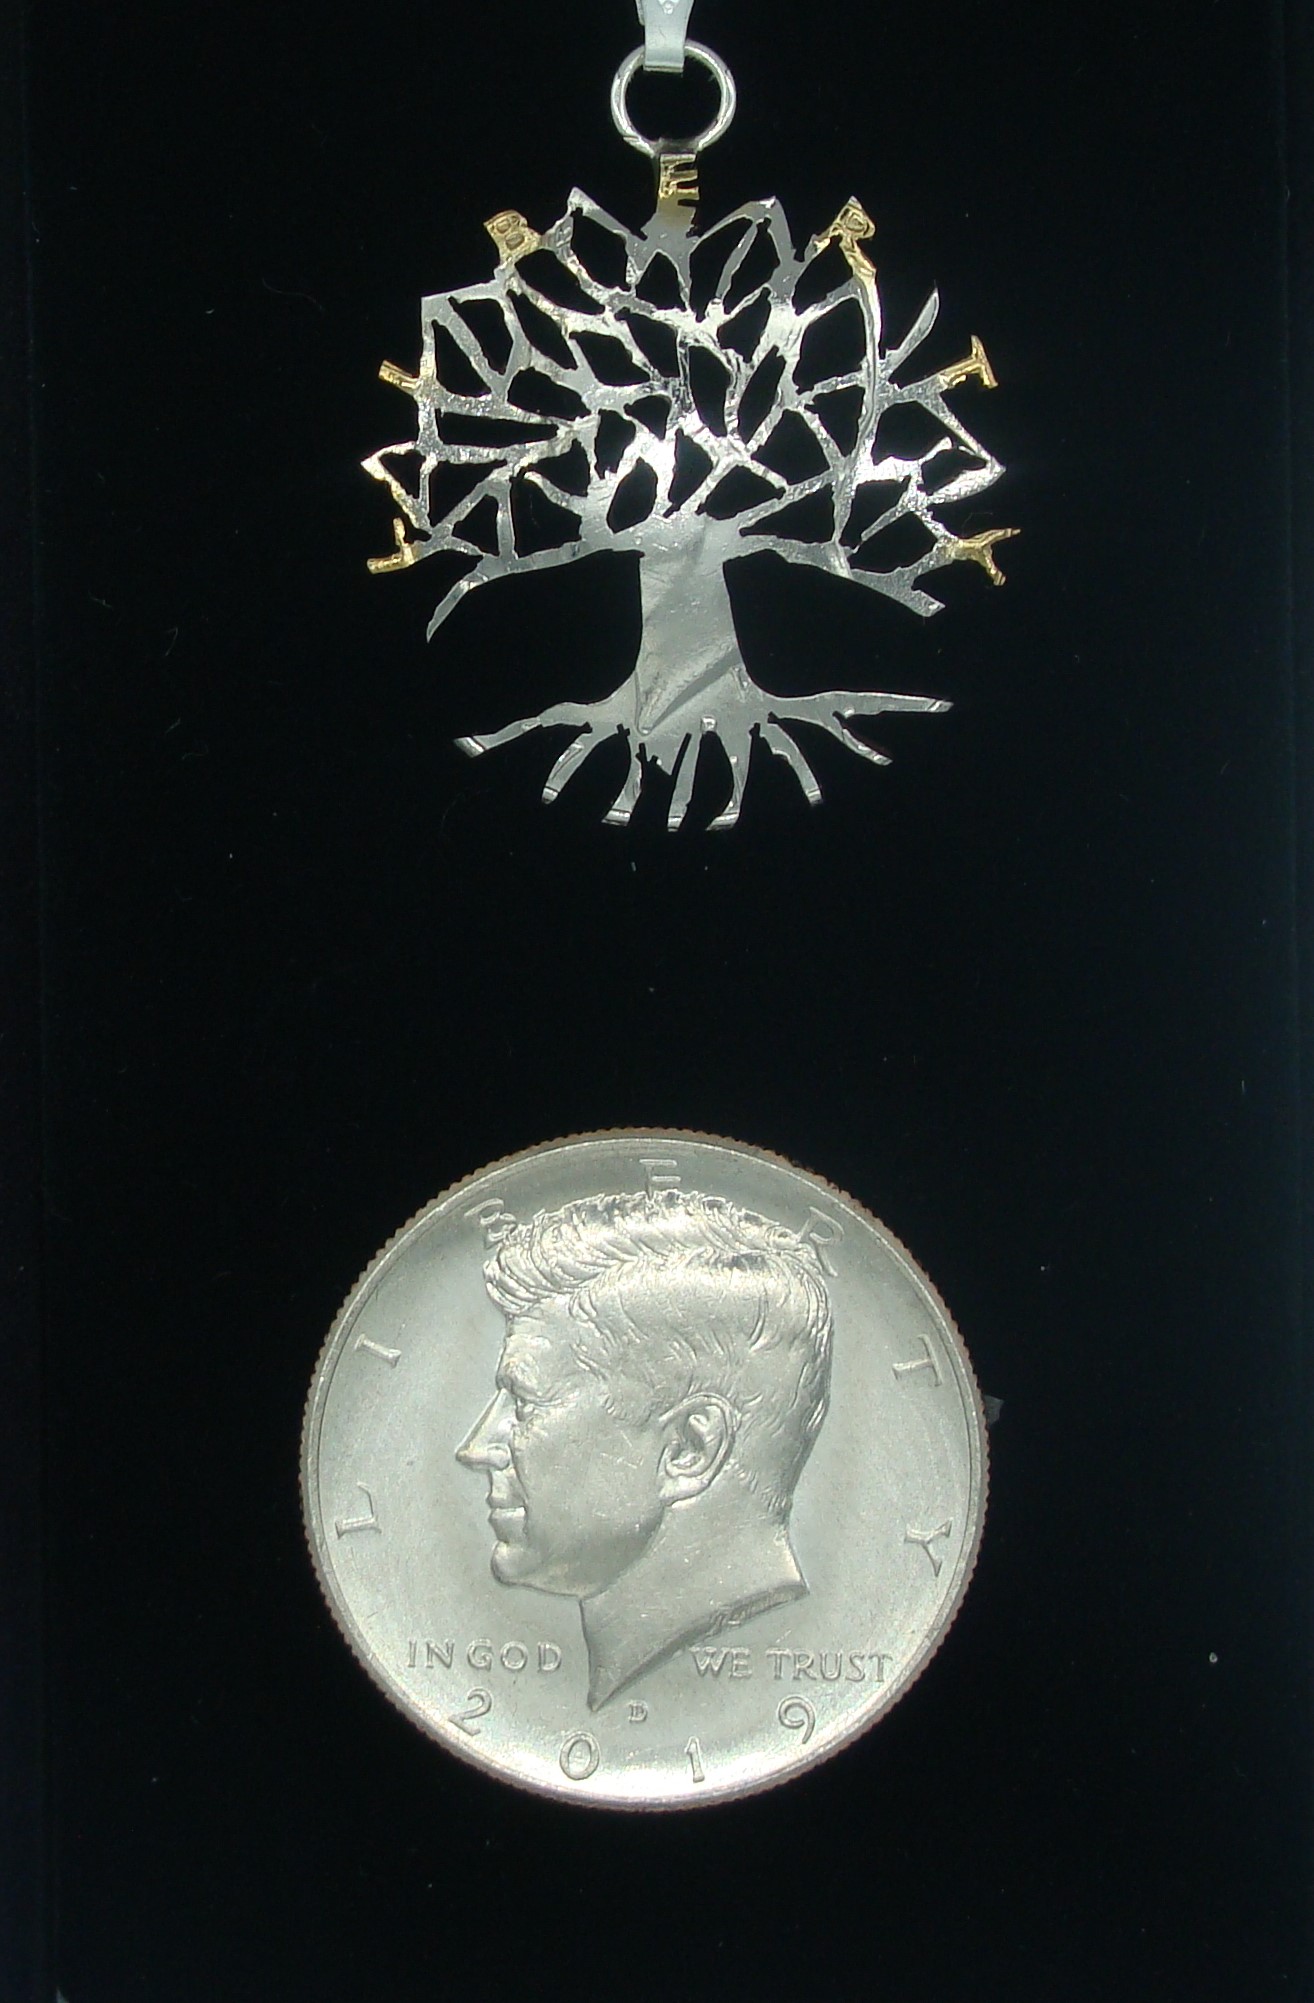 KENNEDY-TREE-WITH-UNCUT-COIN-CLOSEUP